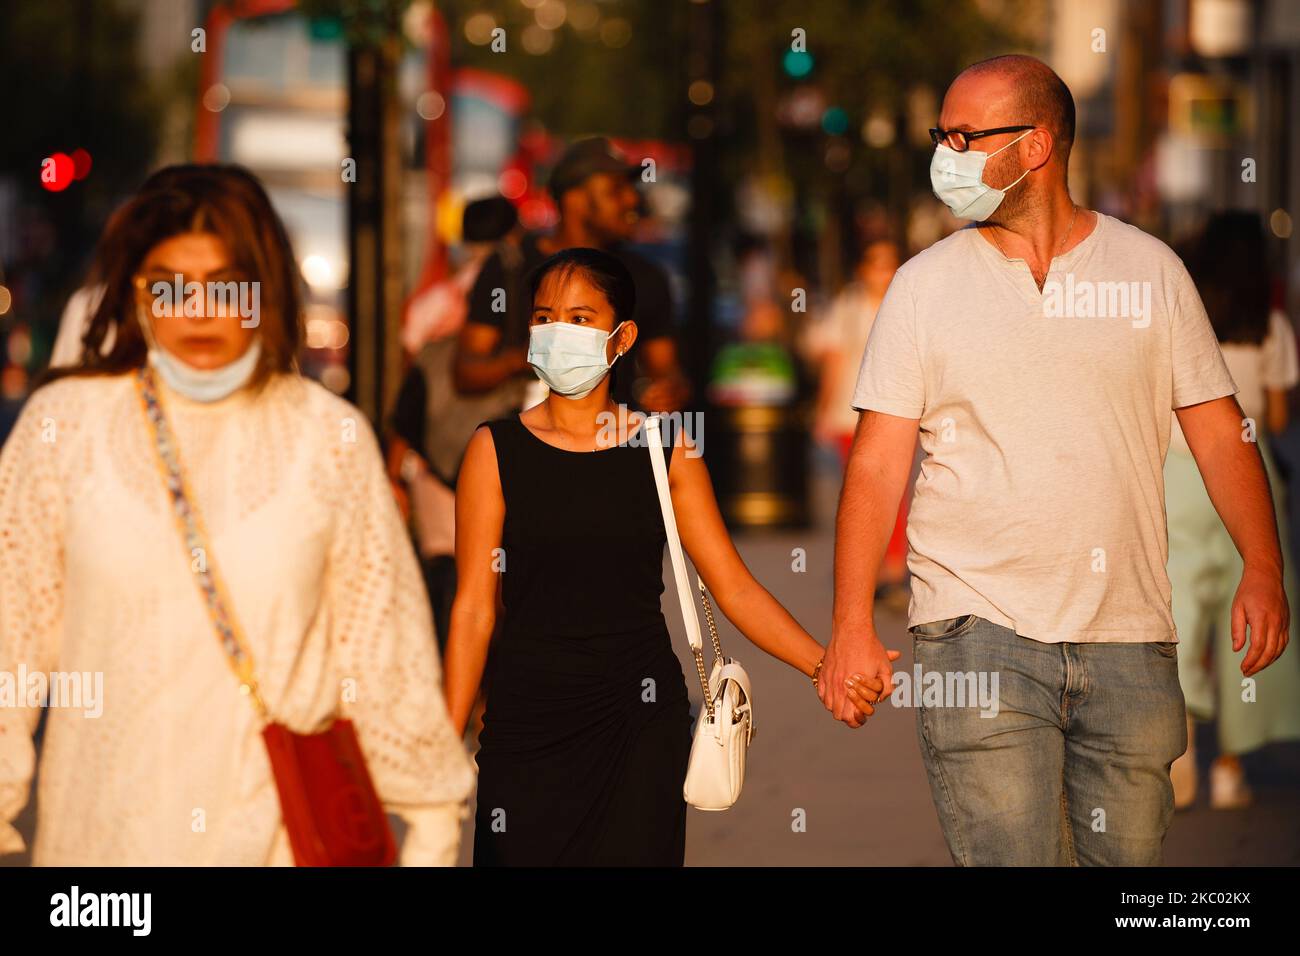 A couple wearing face masks walk along Oxford Street in London, England, on September 16, 2020. While the UK continues to edge towards economic recovery some 3,991 new coronavirus cases were recorded today, in what is the highest daily figure in the country since May 8. Prime Minister Boris Johnson meanwhile today told a parliamentary committee that he did not want a second national lockdown as part of the ongoing response to the covid-19 crisis. (Photo by David Cliff/NurPhoto) Stock Photo